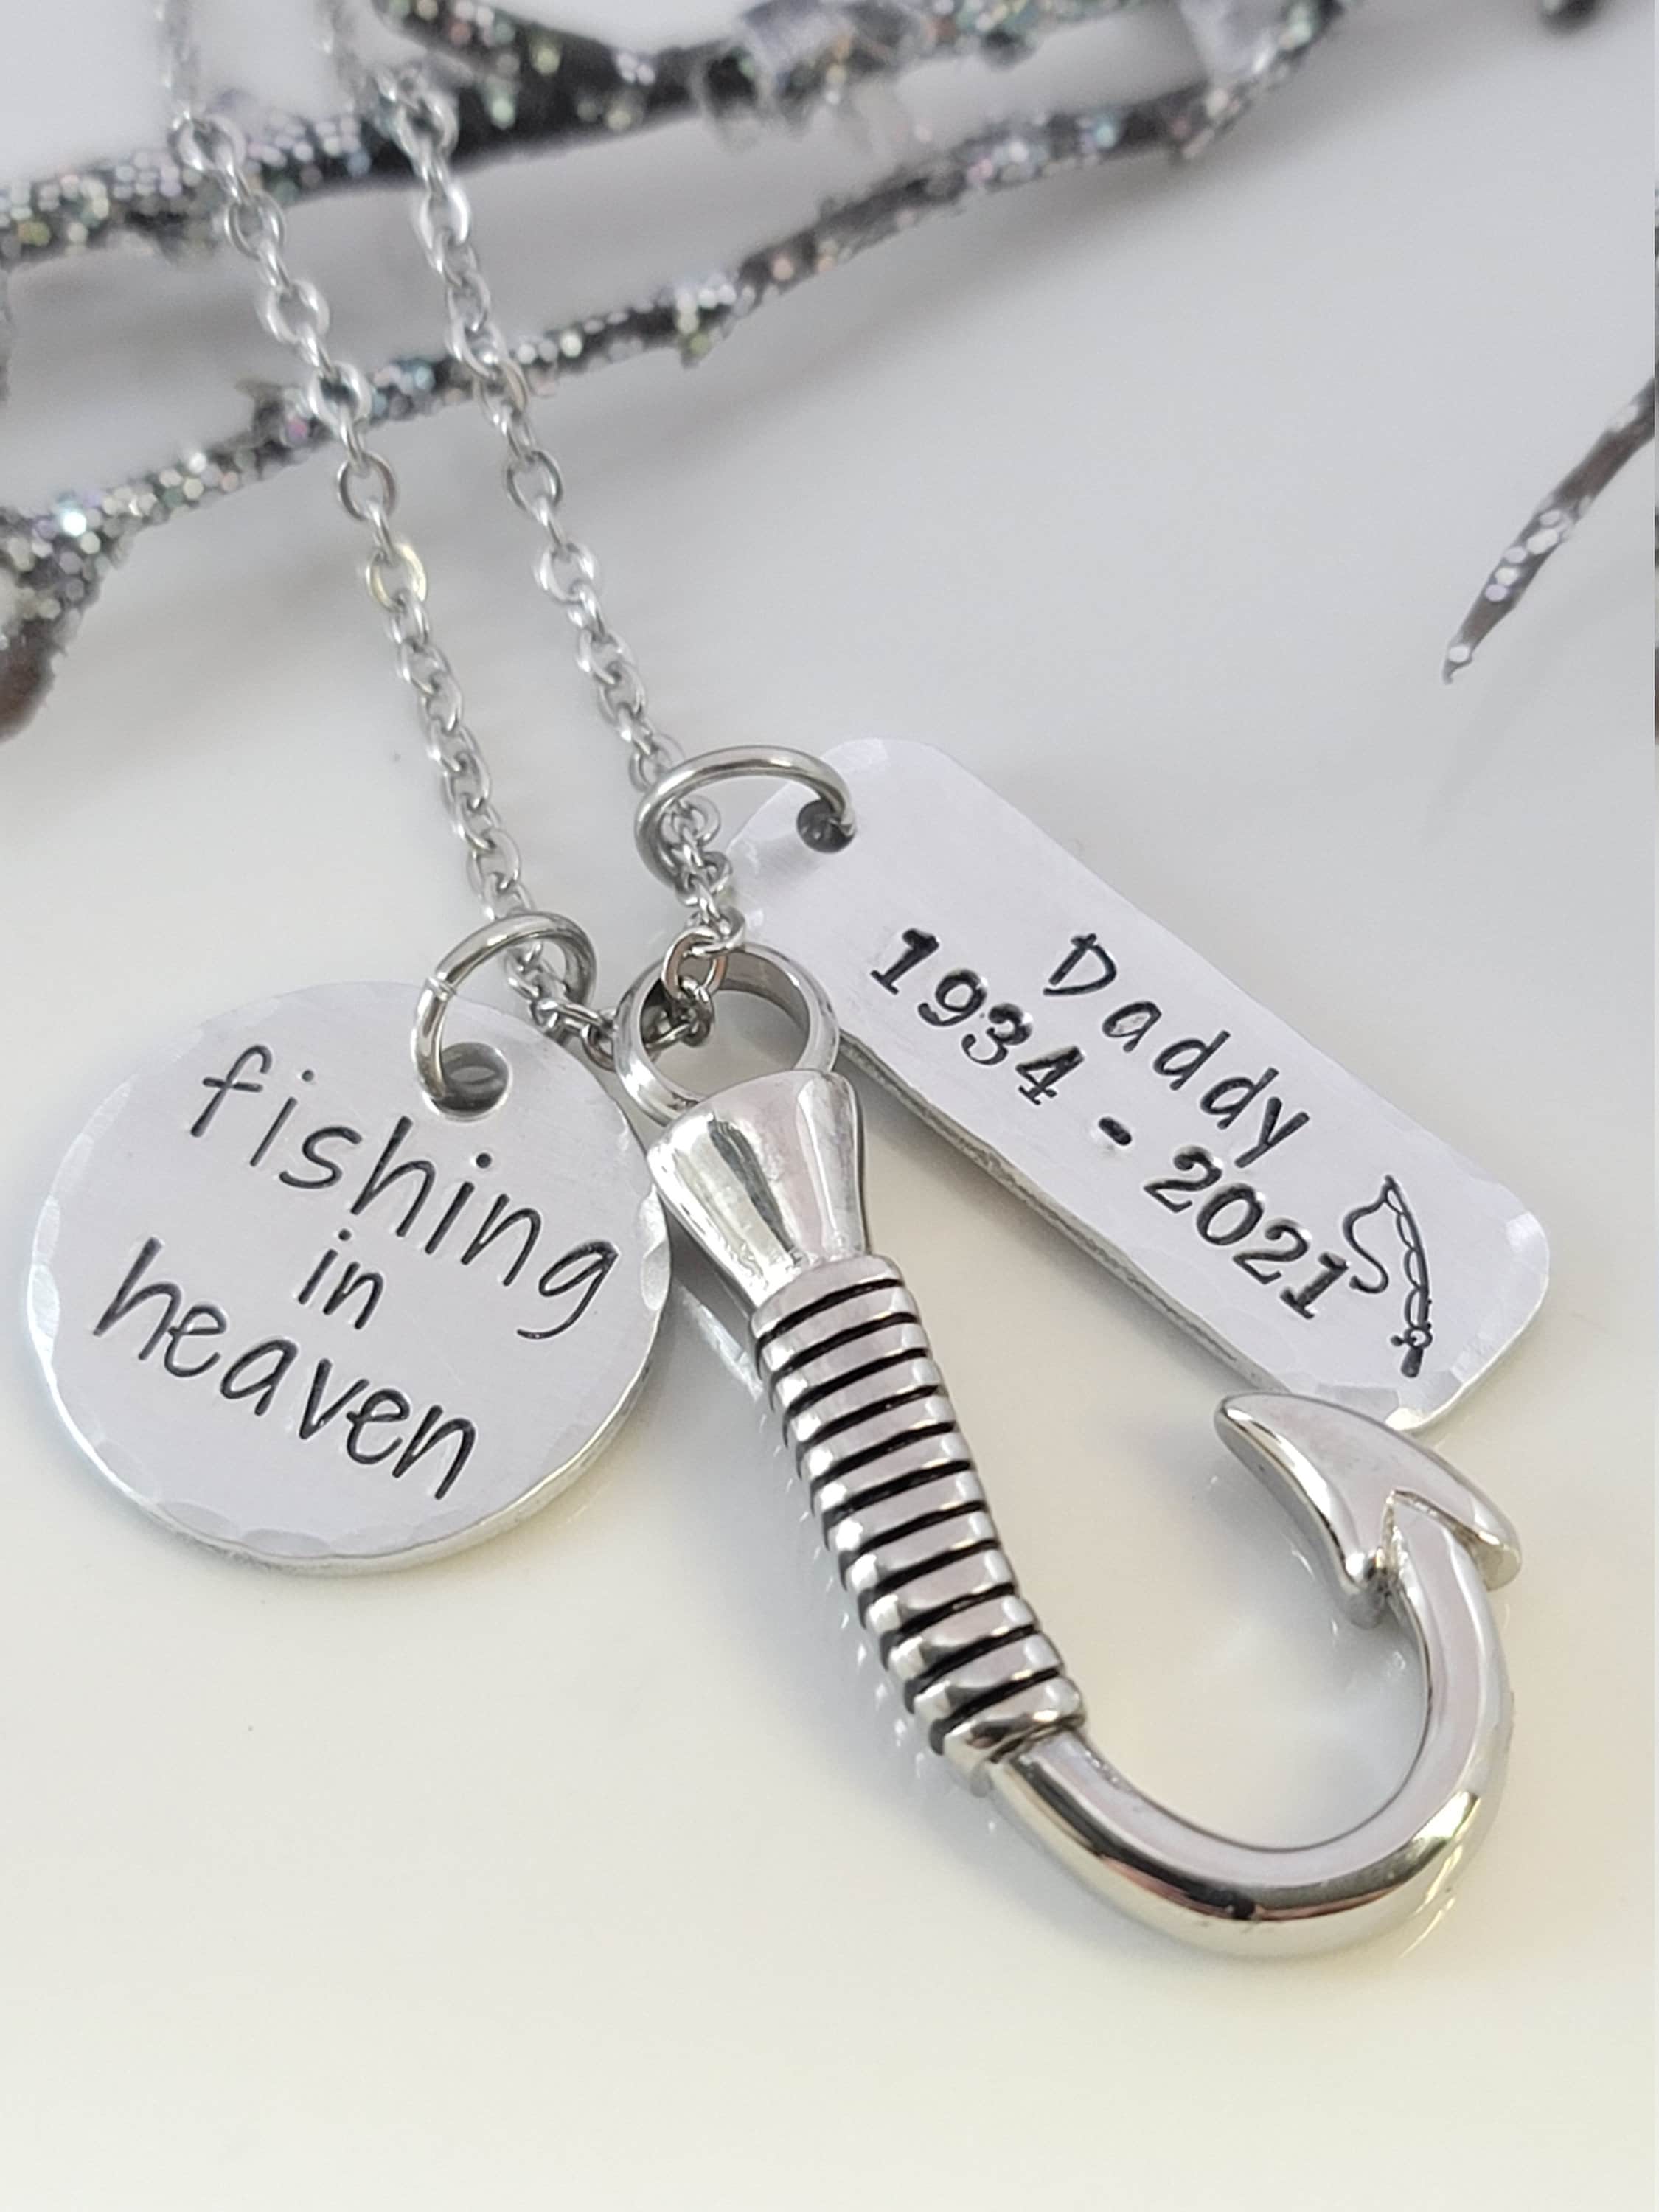 Fishing in Heaven Necklace 